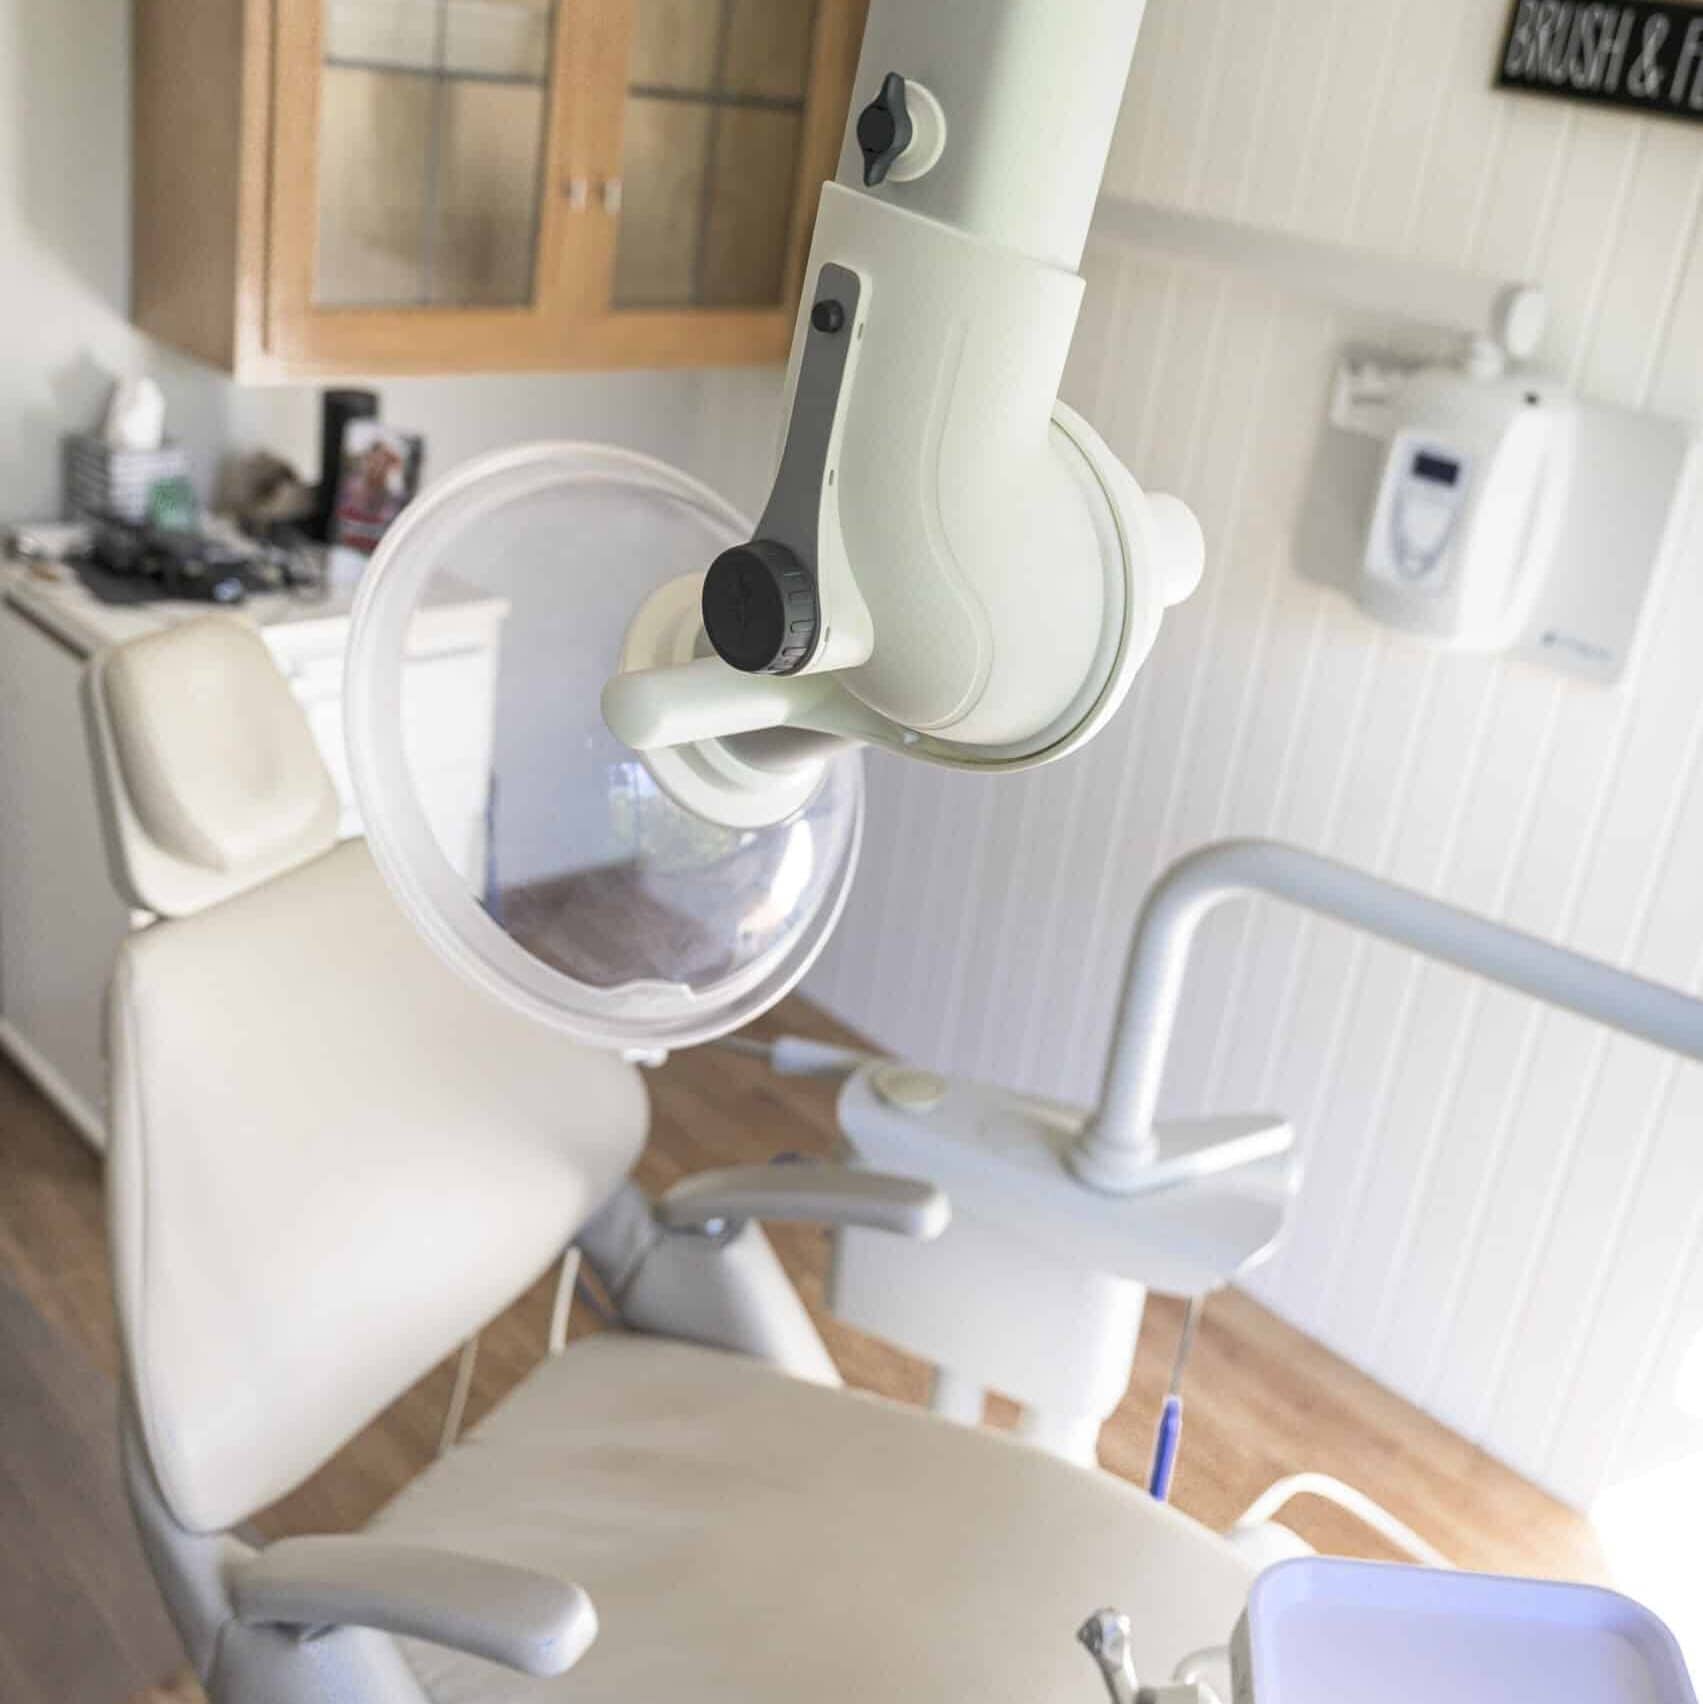 The arm unit of the Ventulus 300 series installed in a dental clinic viewed from behind